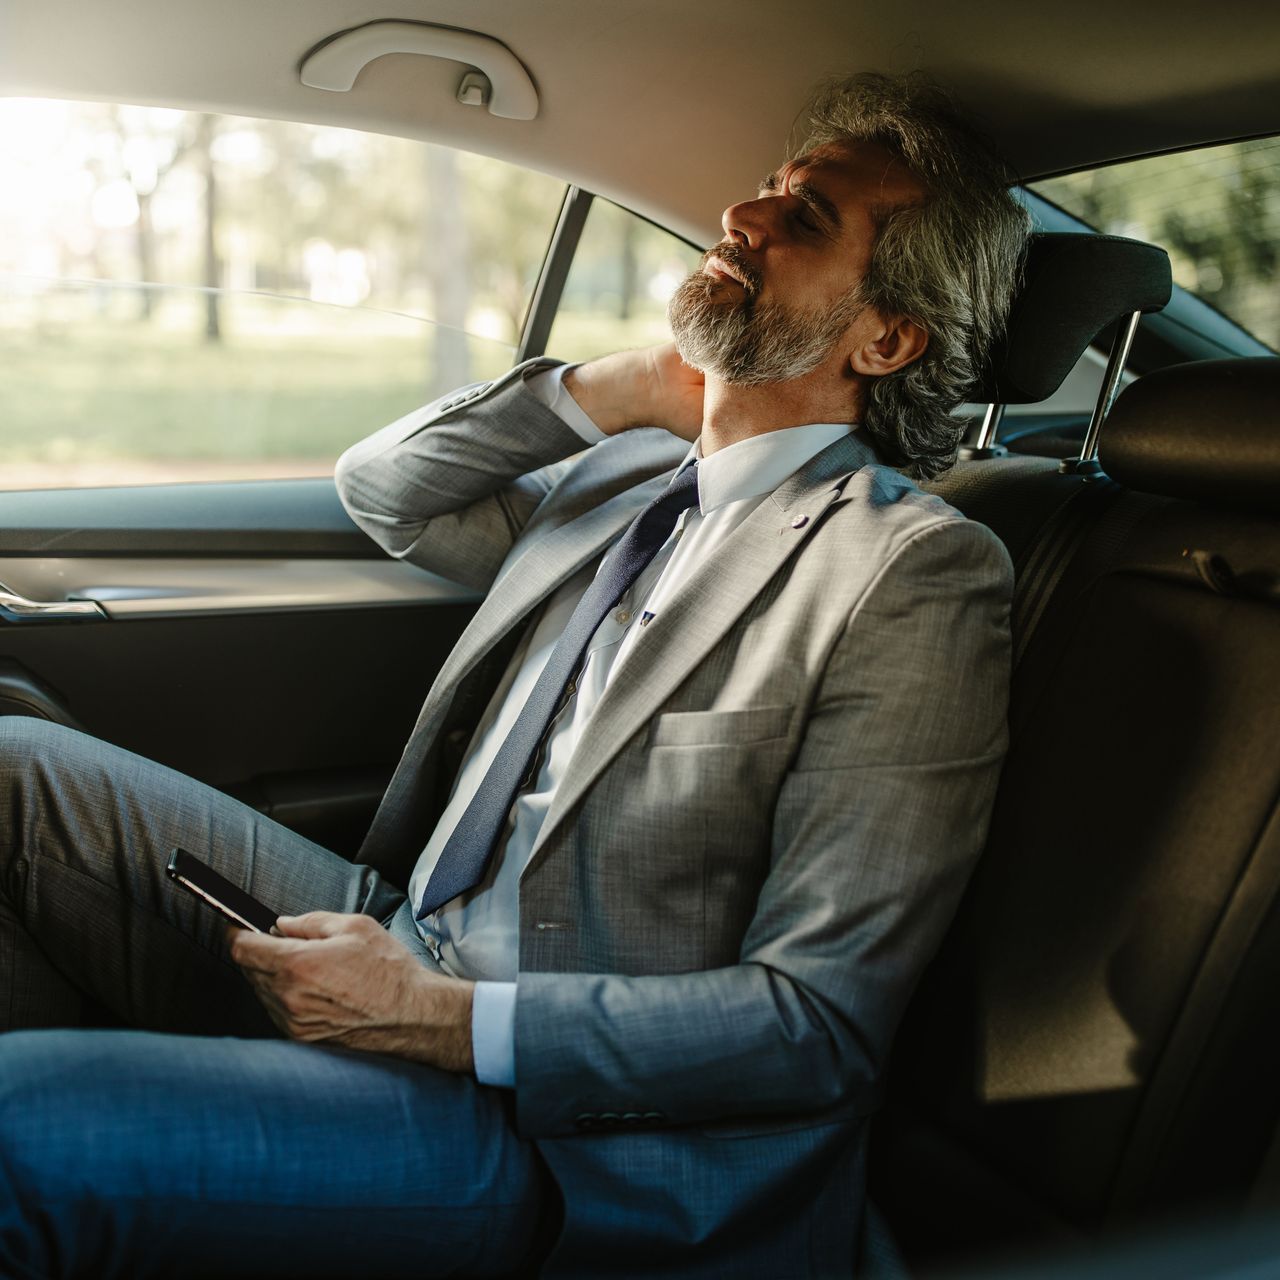 A man in a suit and tie is sitting in the back seat of a car